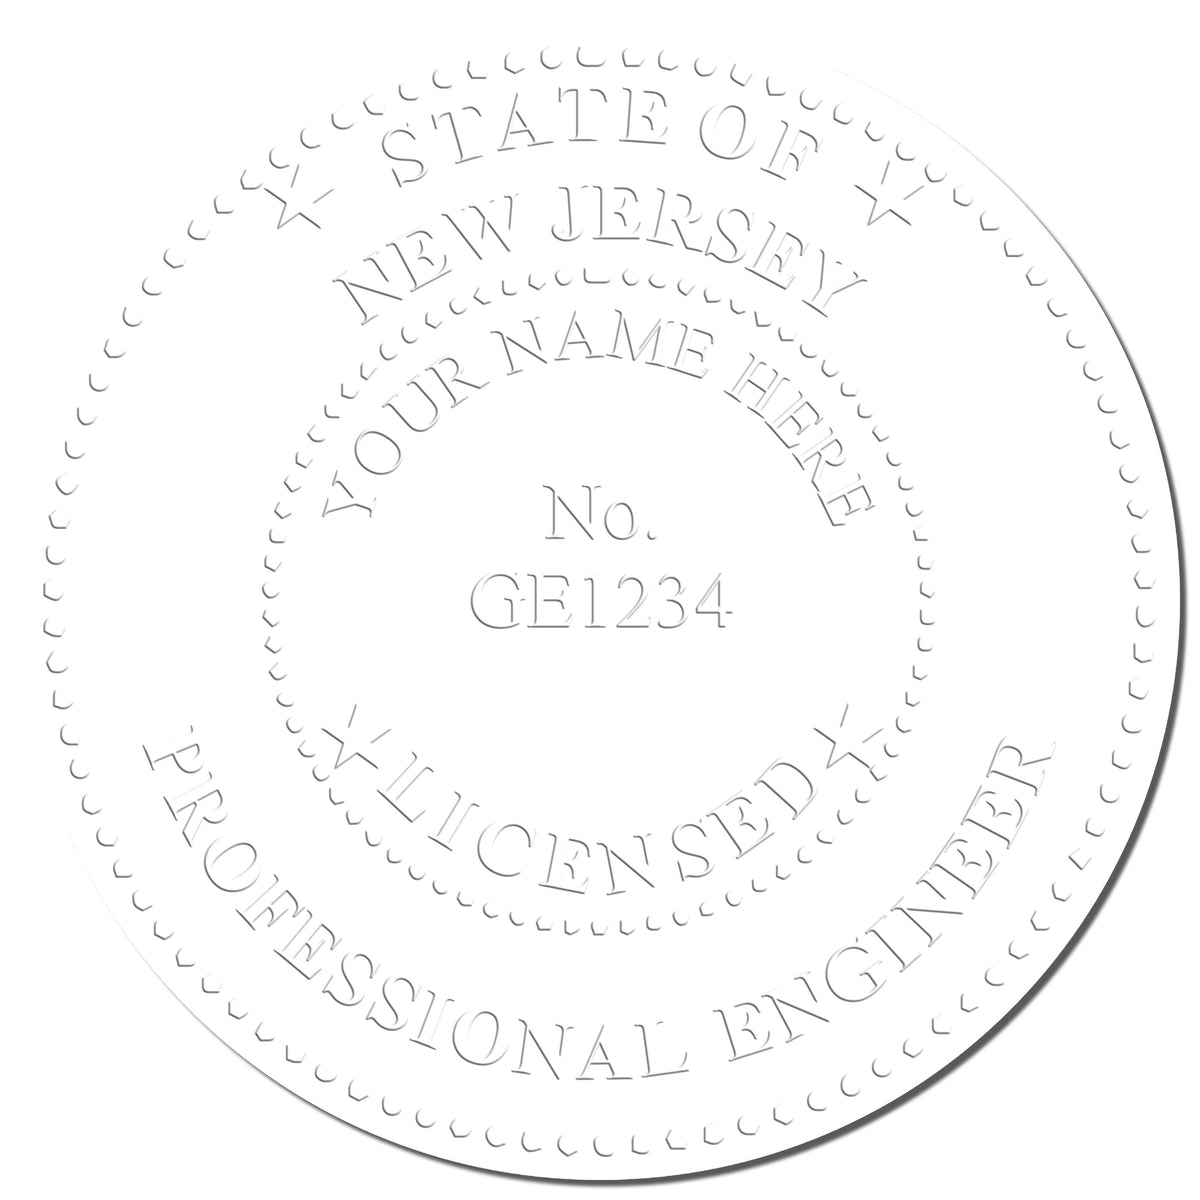 This paper is stamped with a sample imprint of the Heavy Duty Cast Iron New Jersey Engineer Seal Embosser, signifying its quality and reliability.